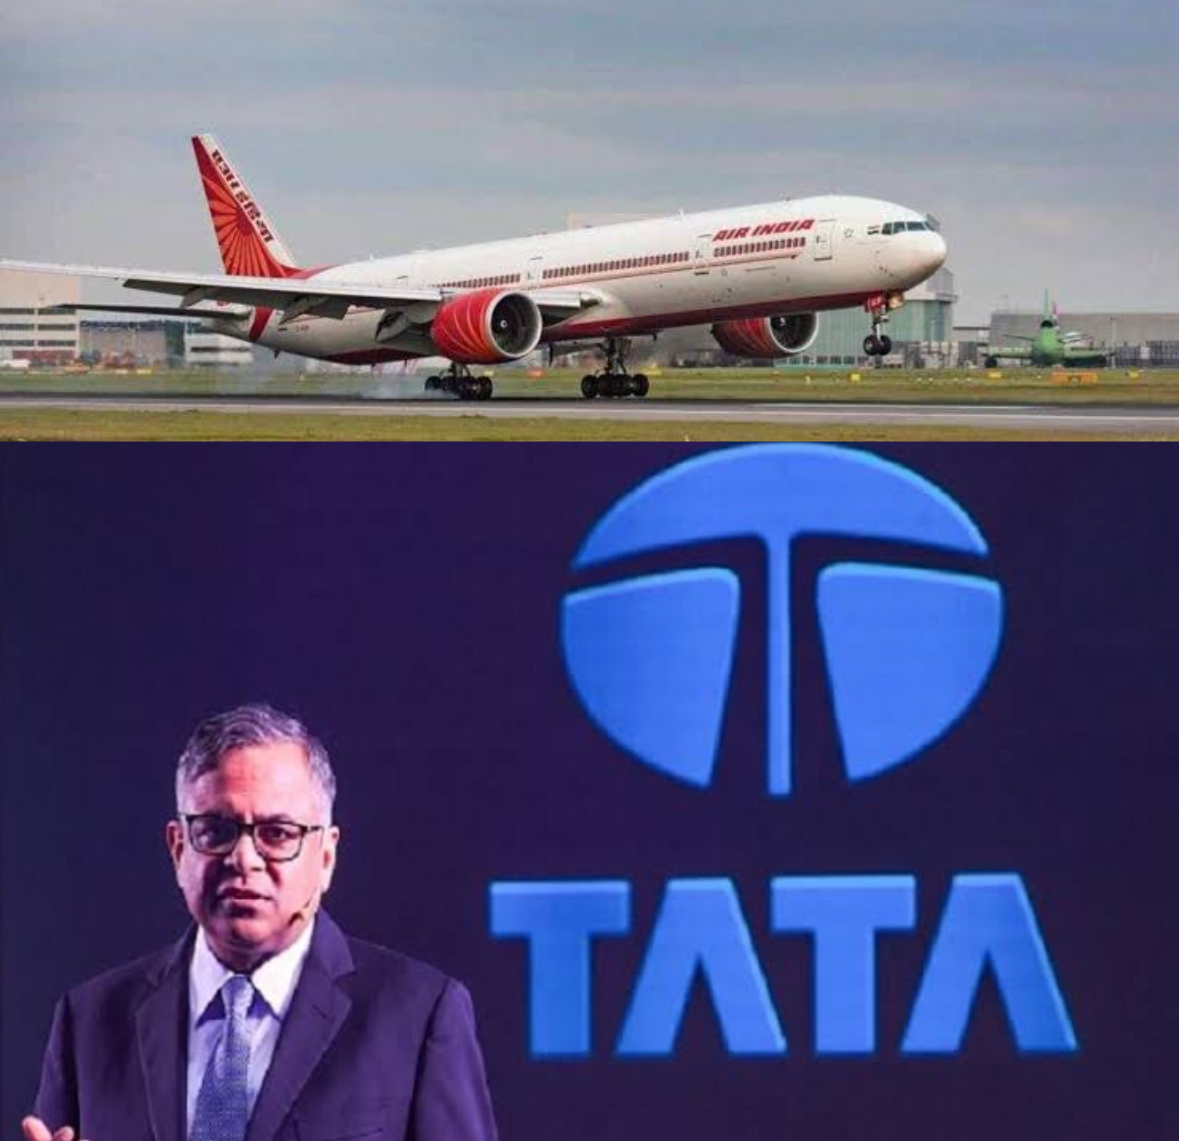 Tata Group companies plan to invest ₹2,300 crore in a manufacturing and R&D base in Karnataka